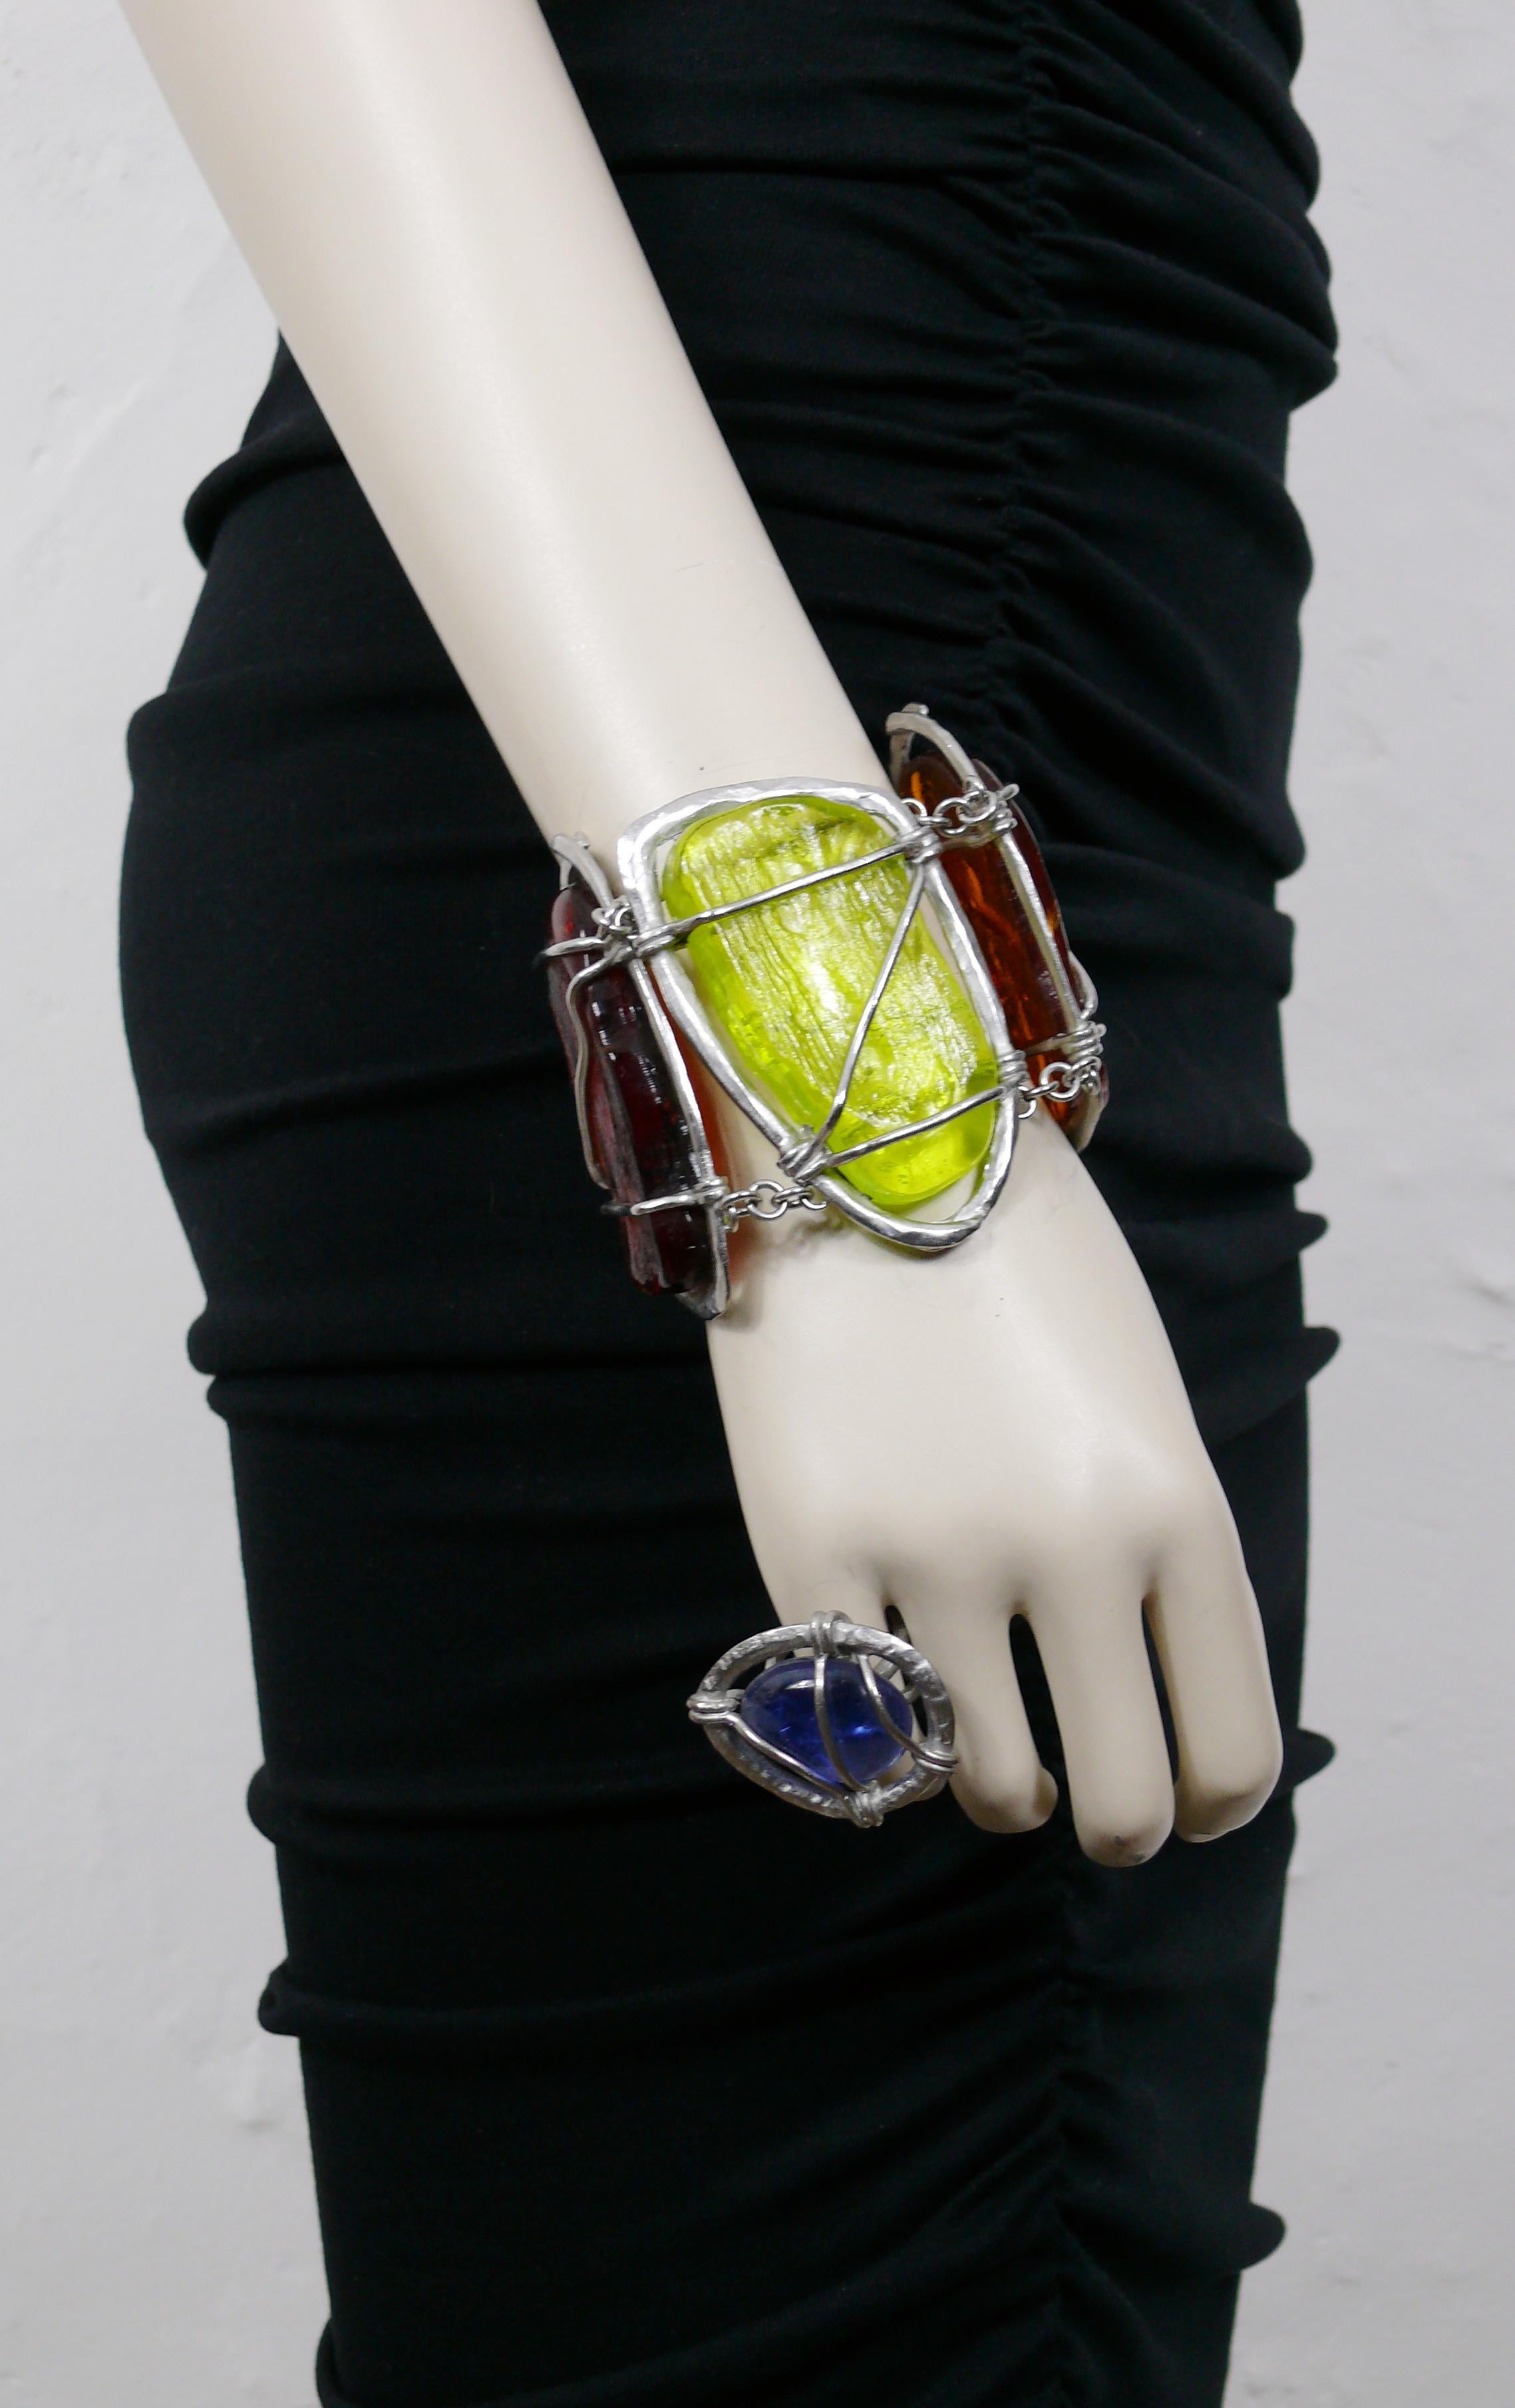 JEAN PAUL GAULTIER abrutalist chunky cuff bracelet and ring set embellished with encaged multicolour glass cabochons.

Silver tone metal hardware.
Antiqued patina.

Marked JEAN PAUL GAULTIER on the bracelet.
The ring is UNMARKED.

BRACELET